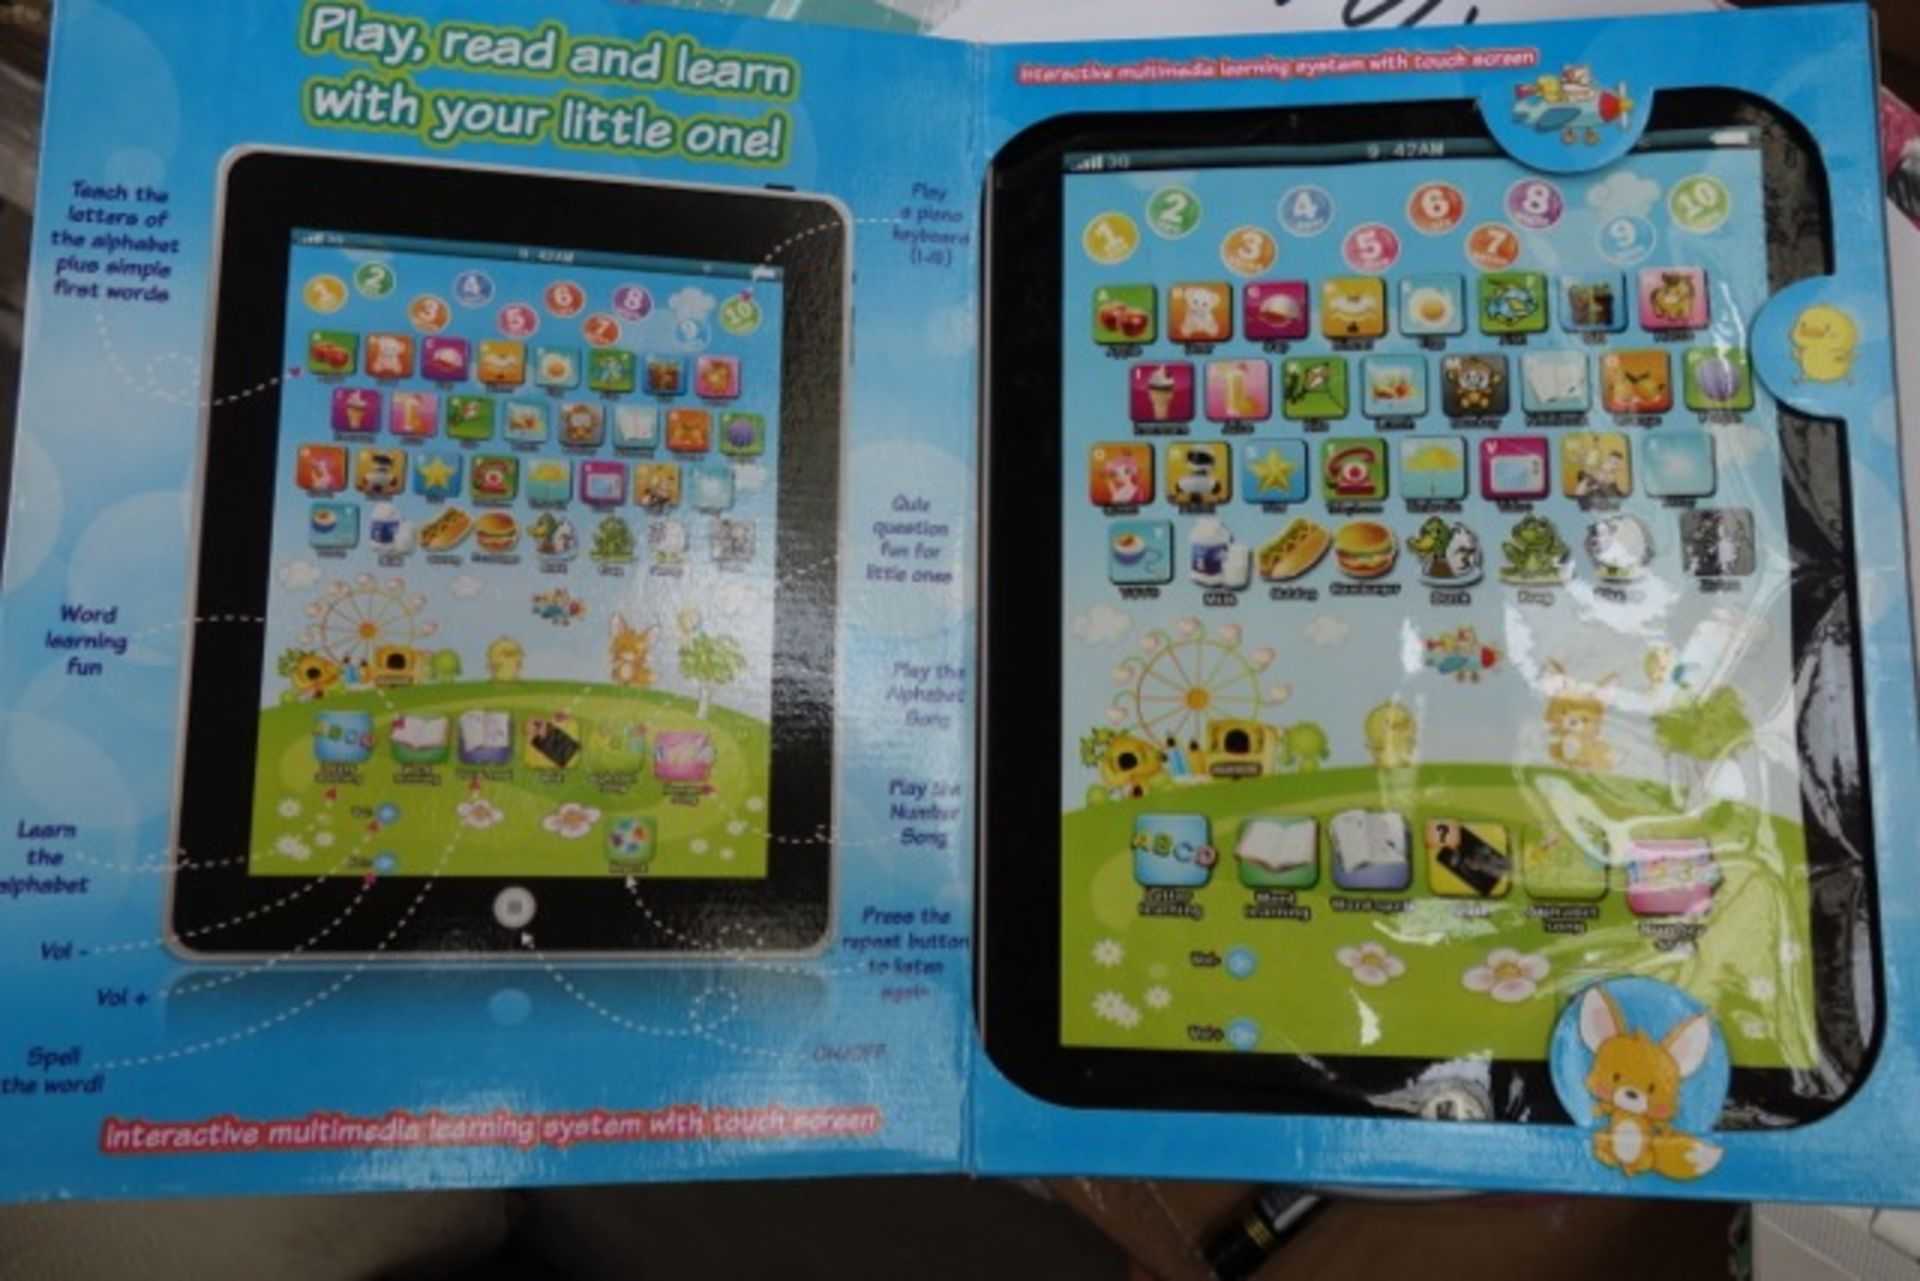 48 x My First Tablet Computor. Play, read & learn! Interactive multimedia learning system with - Image 4 of 4